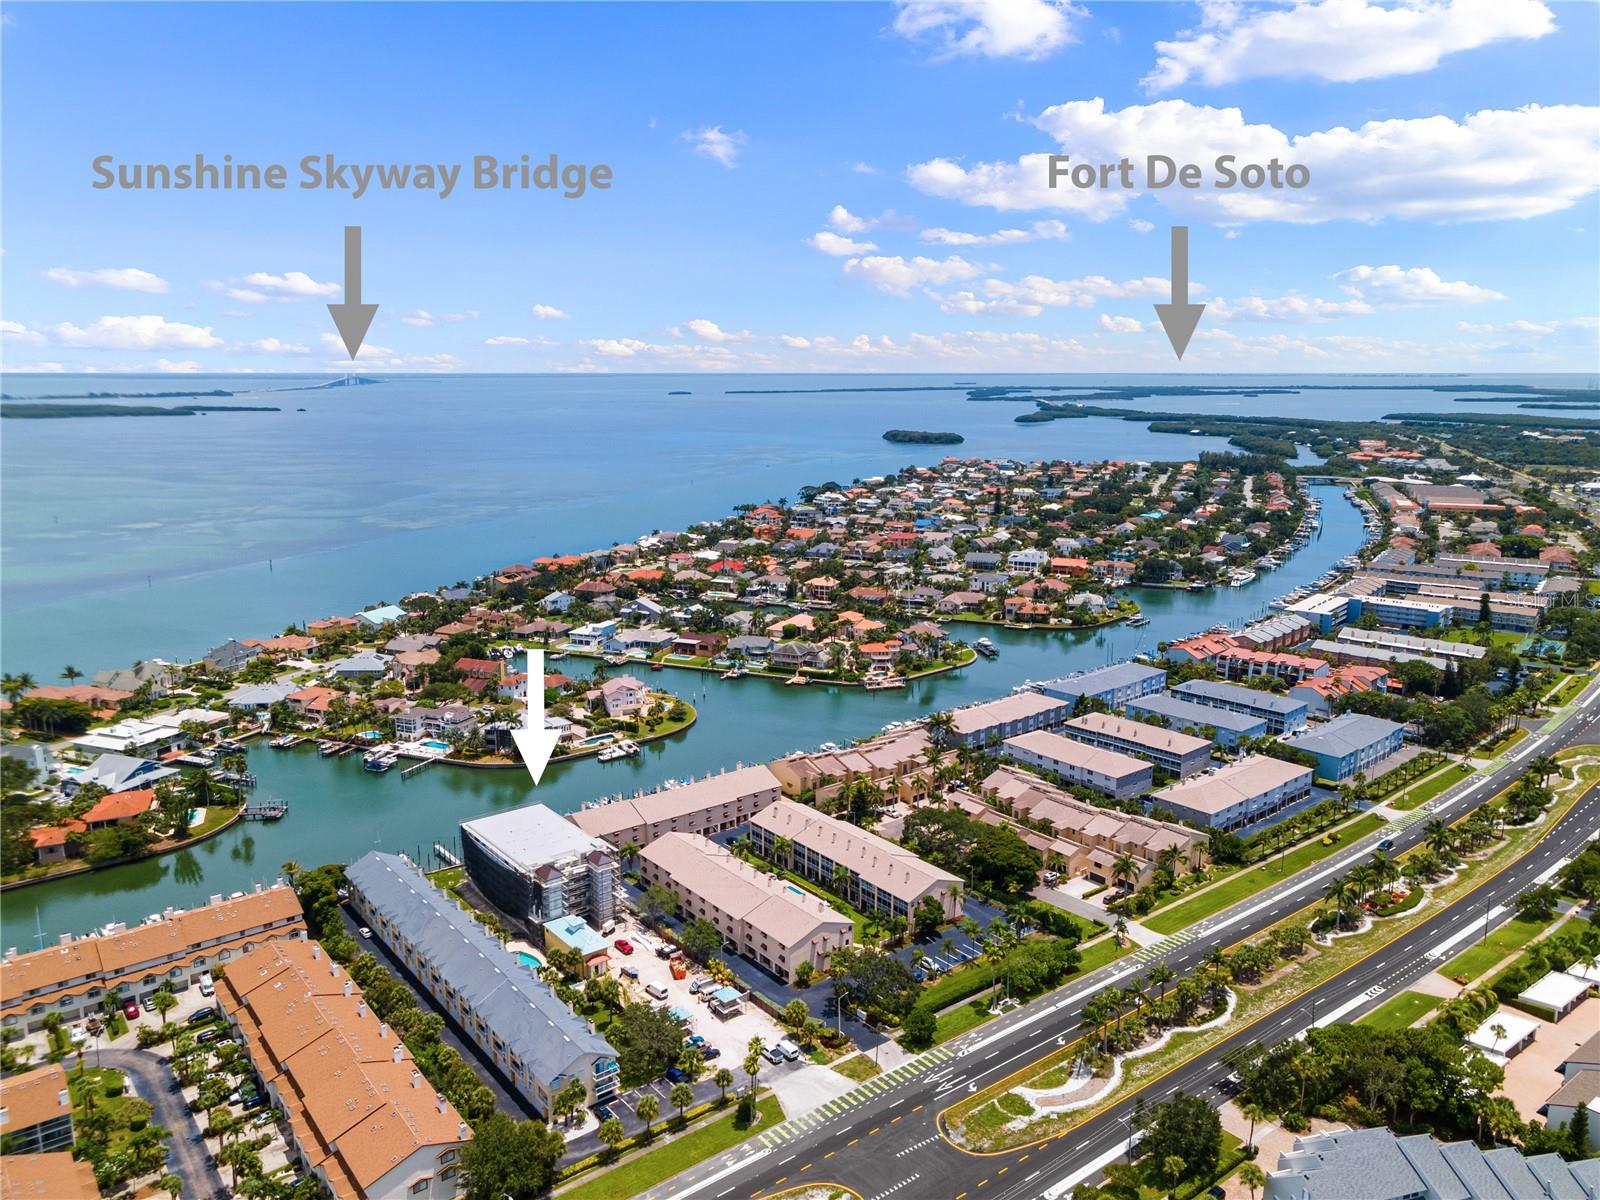 Quiet Cove is only 15 minutes away from downtown St Pete.  So enjoy the boating and fishing at Quiet Cove during the day and head downtown for nightlife.